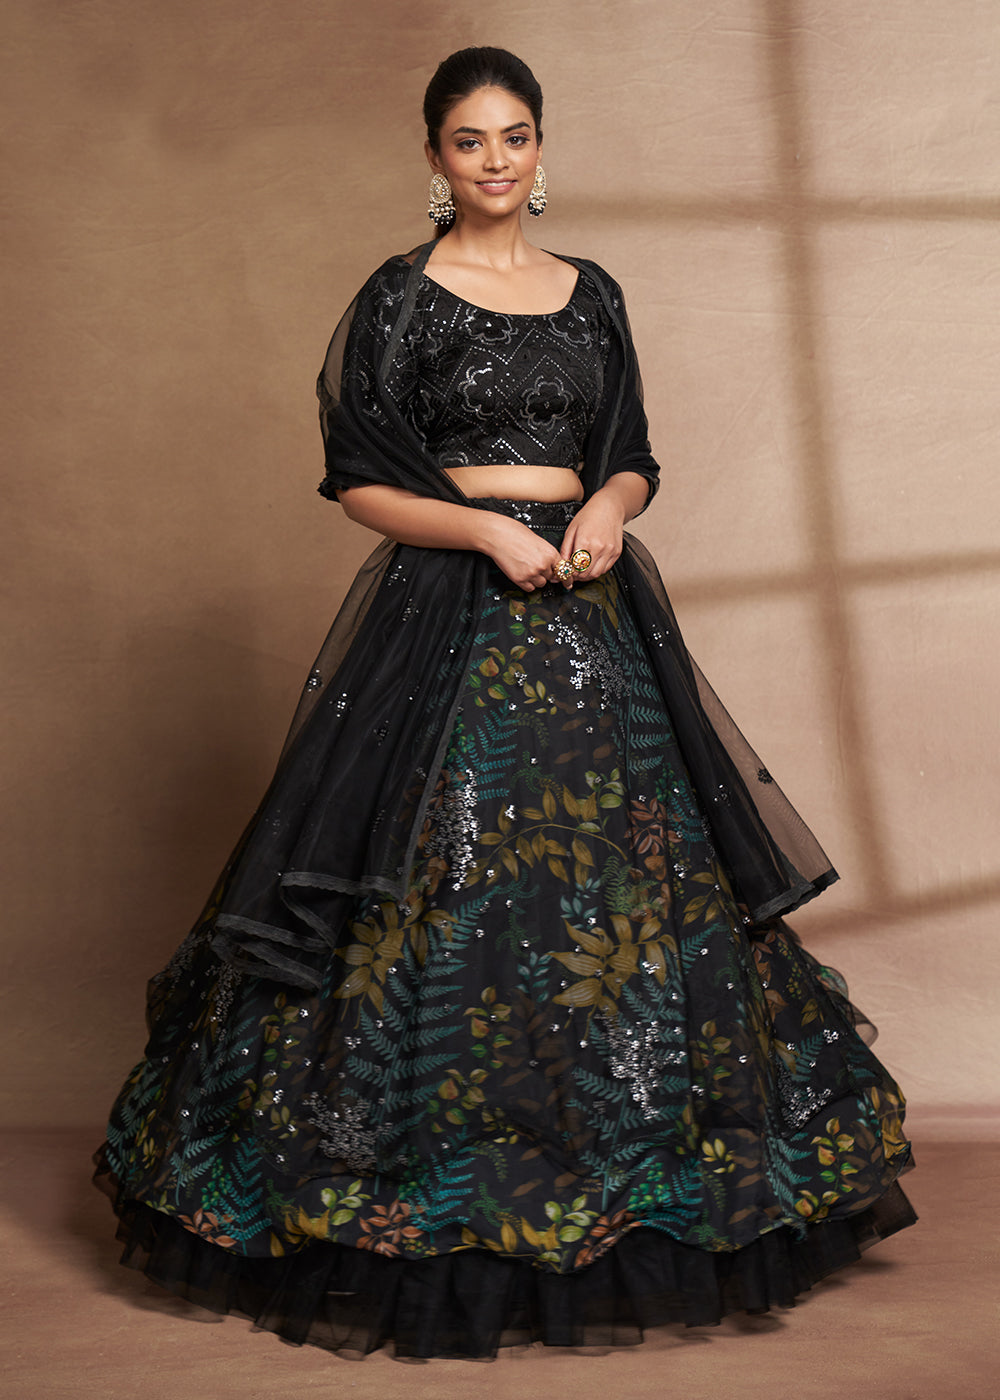 Buy Now Lovely Black Floral Digital Printed & Embroidered Lehenga Choli Online in USA, UK, Canada & Worldwide at Empress Clothing.